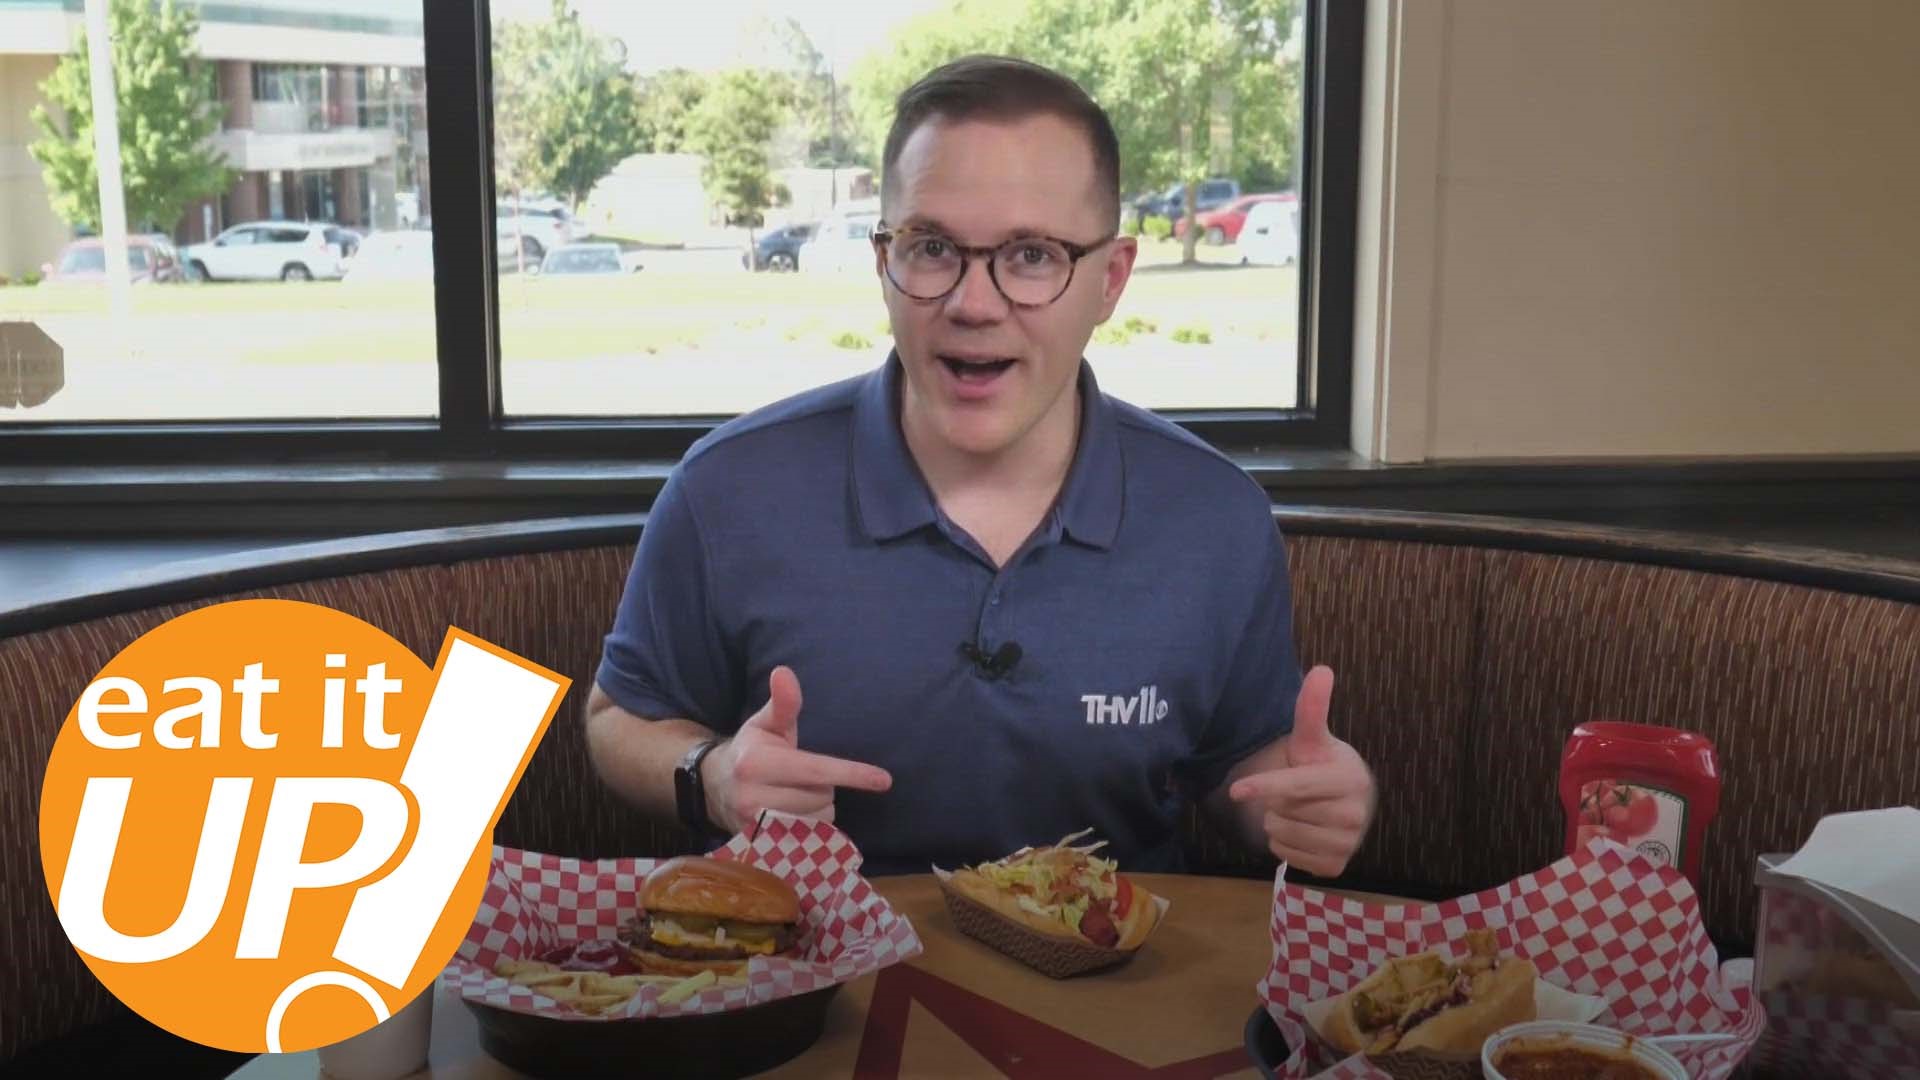 On this week's Eat It Up, Skot Covert visits Franks in North Little Rock— a restaurant run by two friends with a passion for fresh, handcrafted burgers and hot dogs.